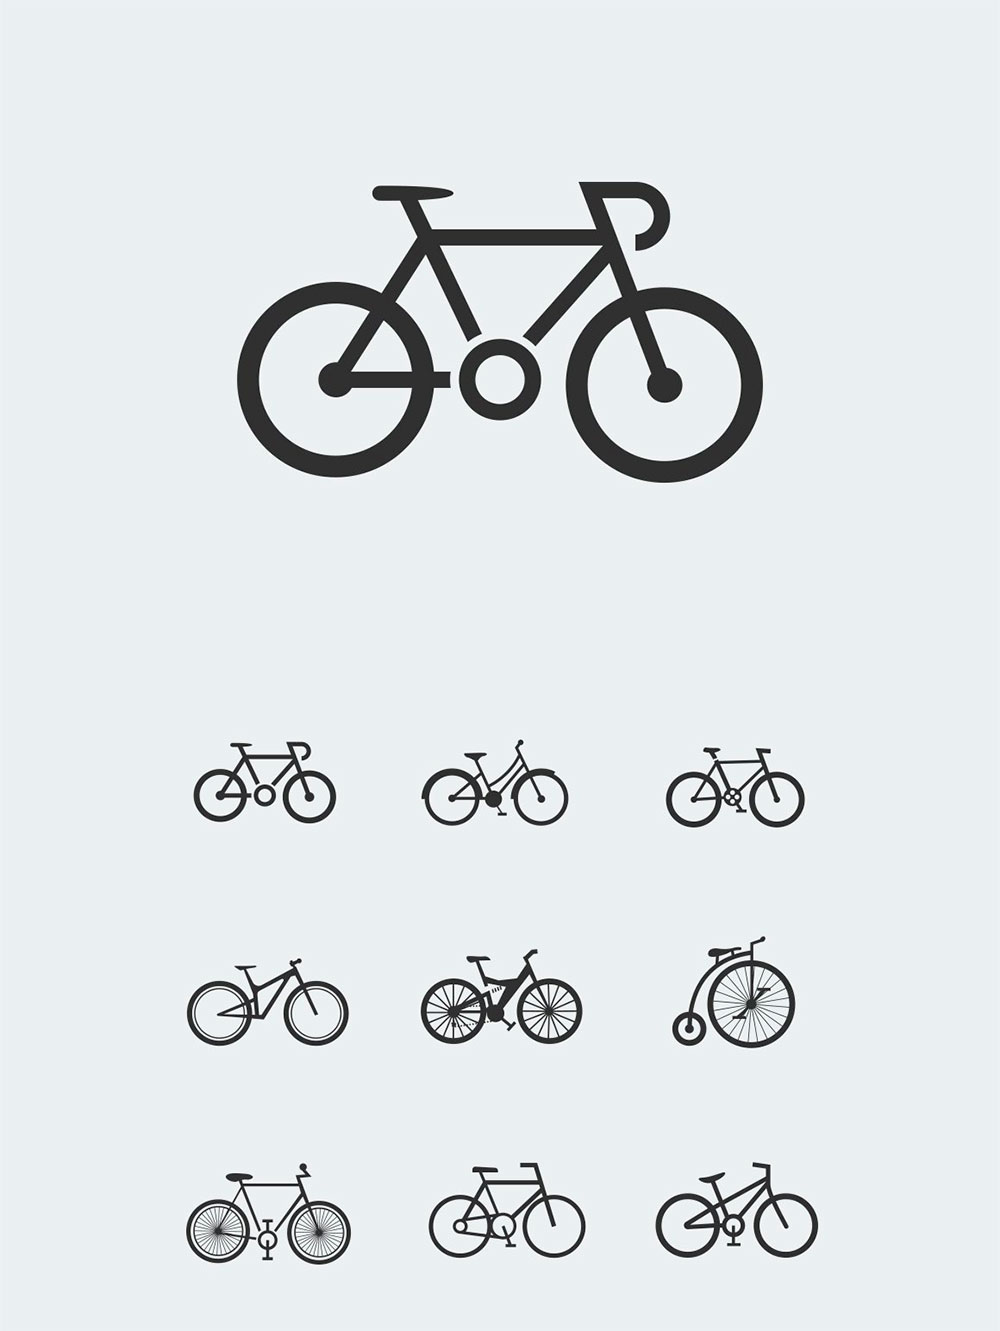 9 bicycle icons, picture for pinterest.